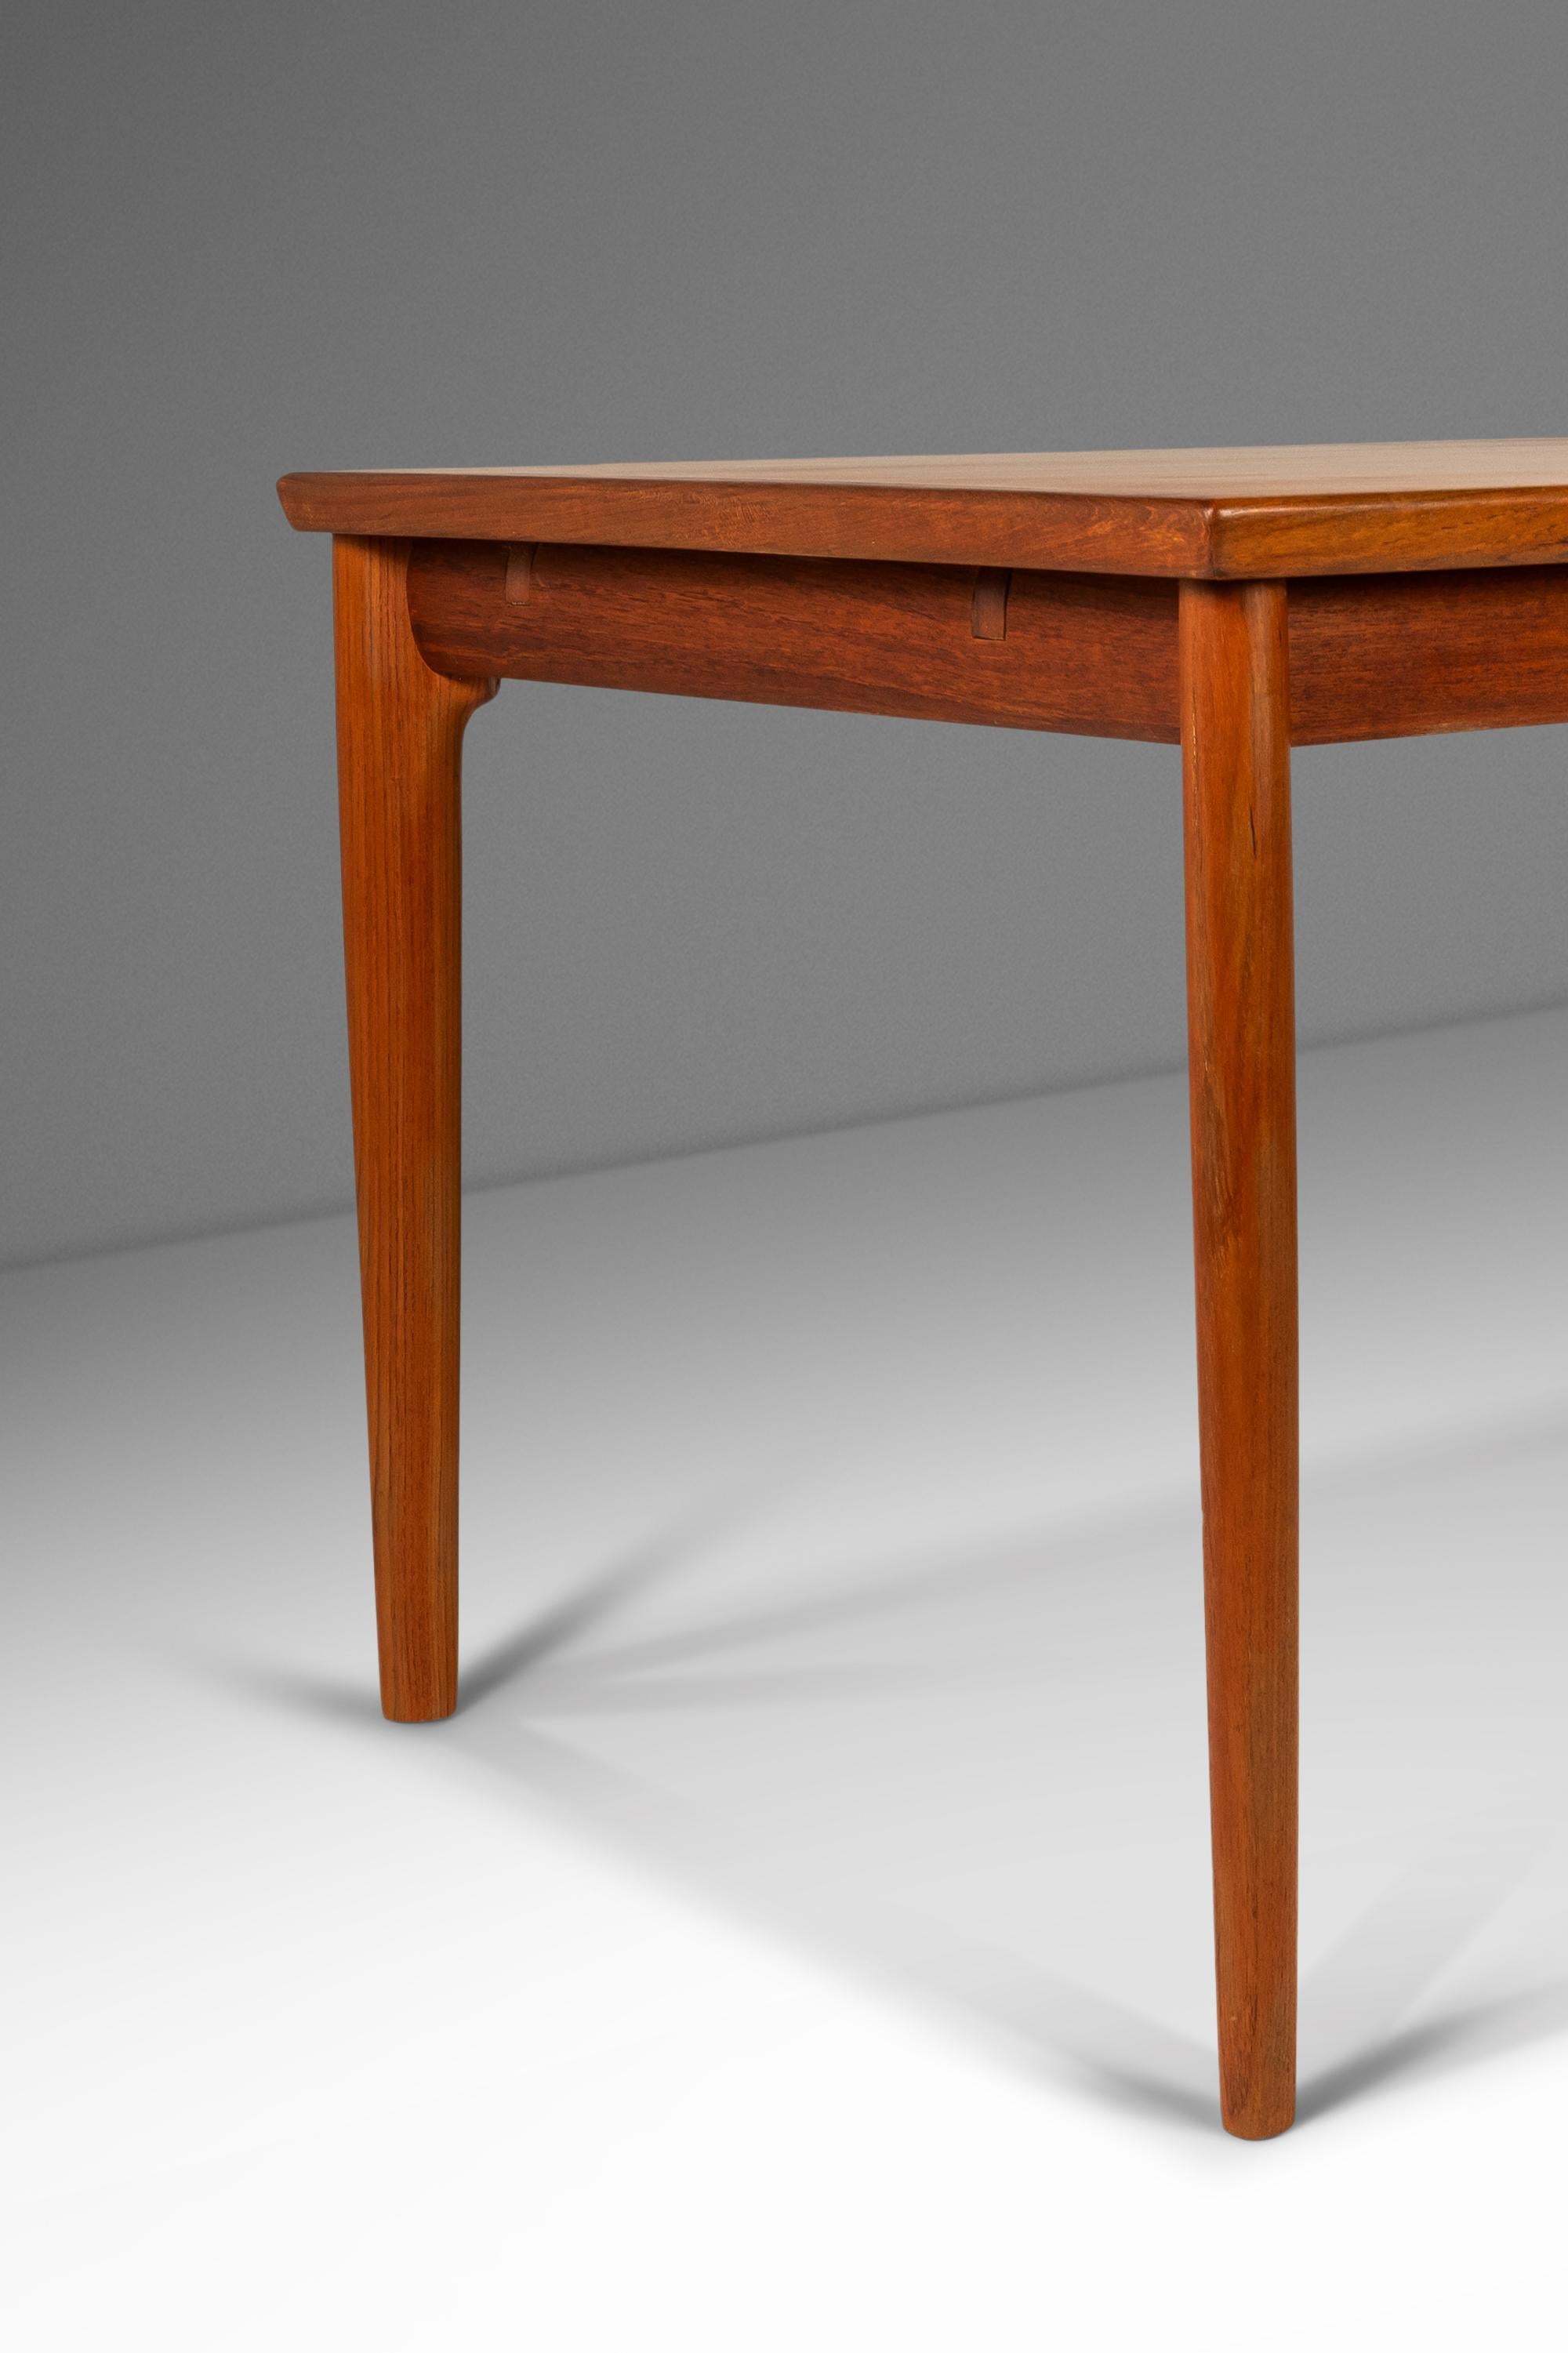 Danish Modern Expansion Dining Table in Teak w/ Stow-in-Table Leaves, c. 1960s For Sale 9